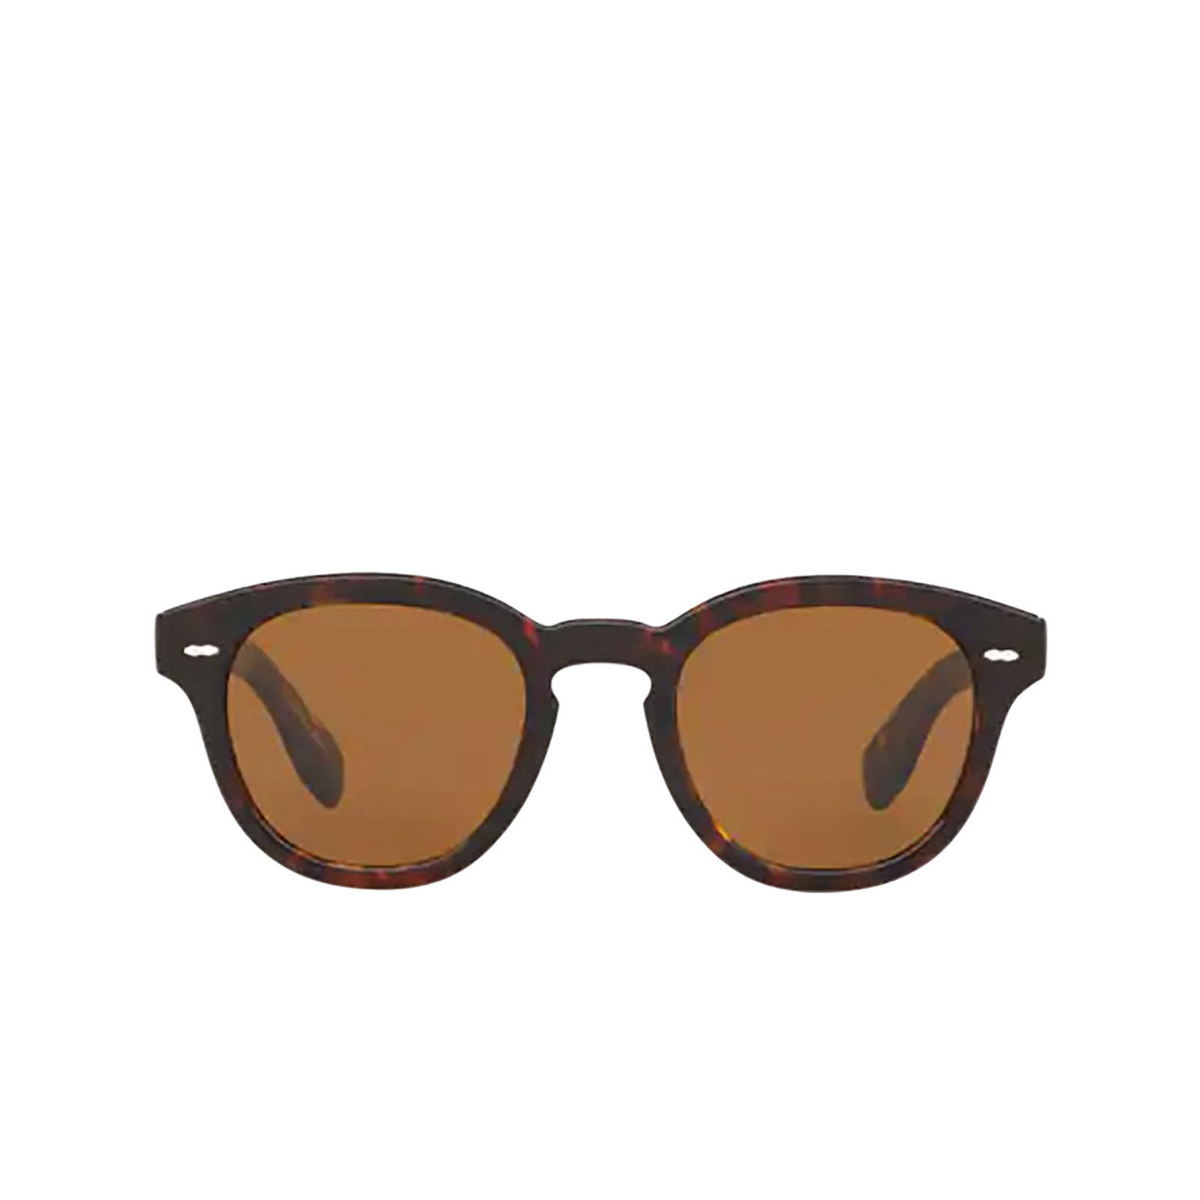 Occhiali da sole Oliver Peoples CARY GRANT 165453 DM2 - frontale